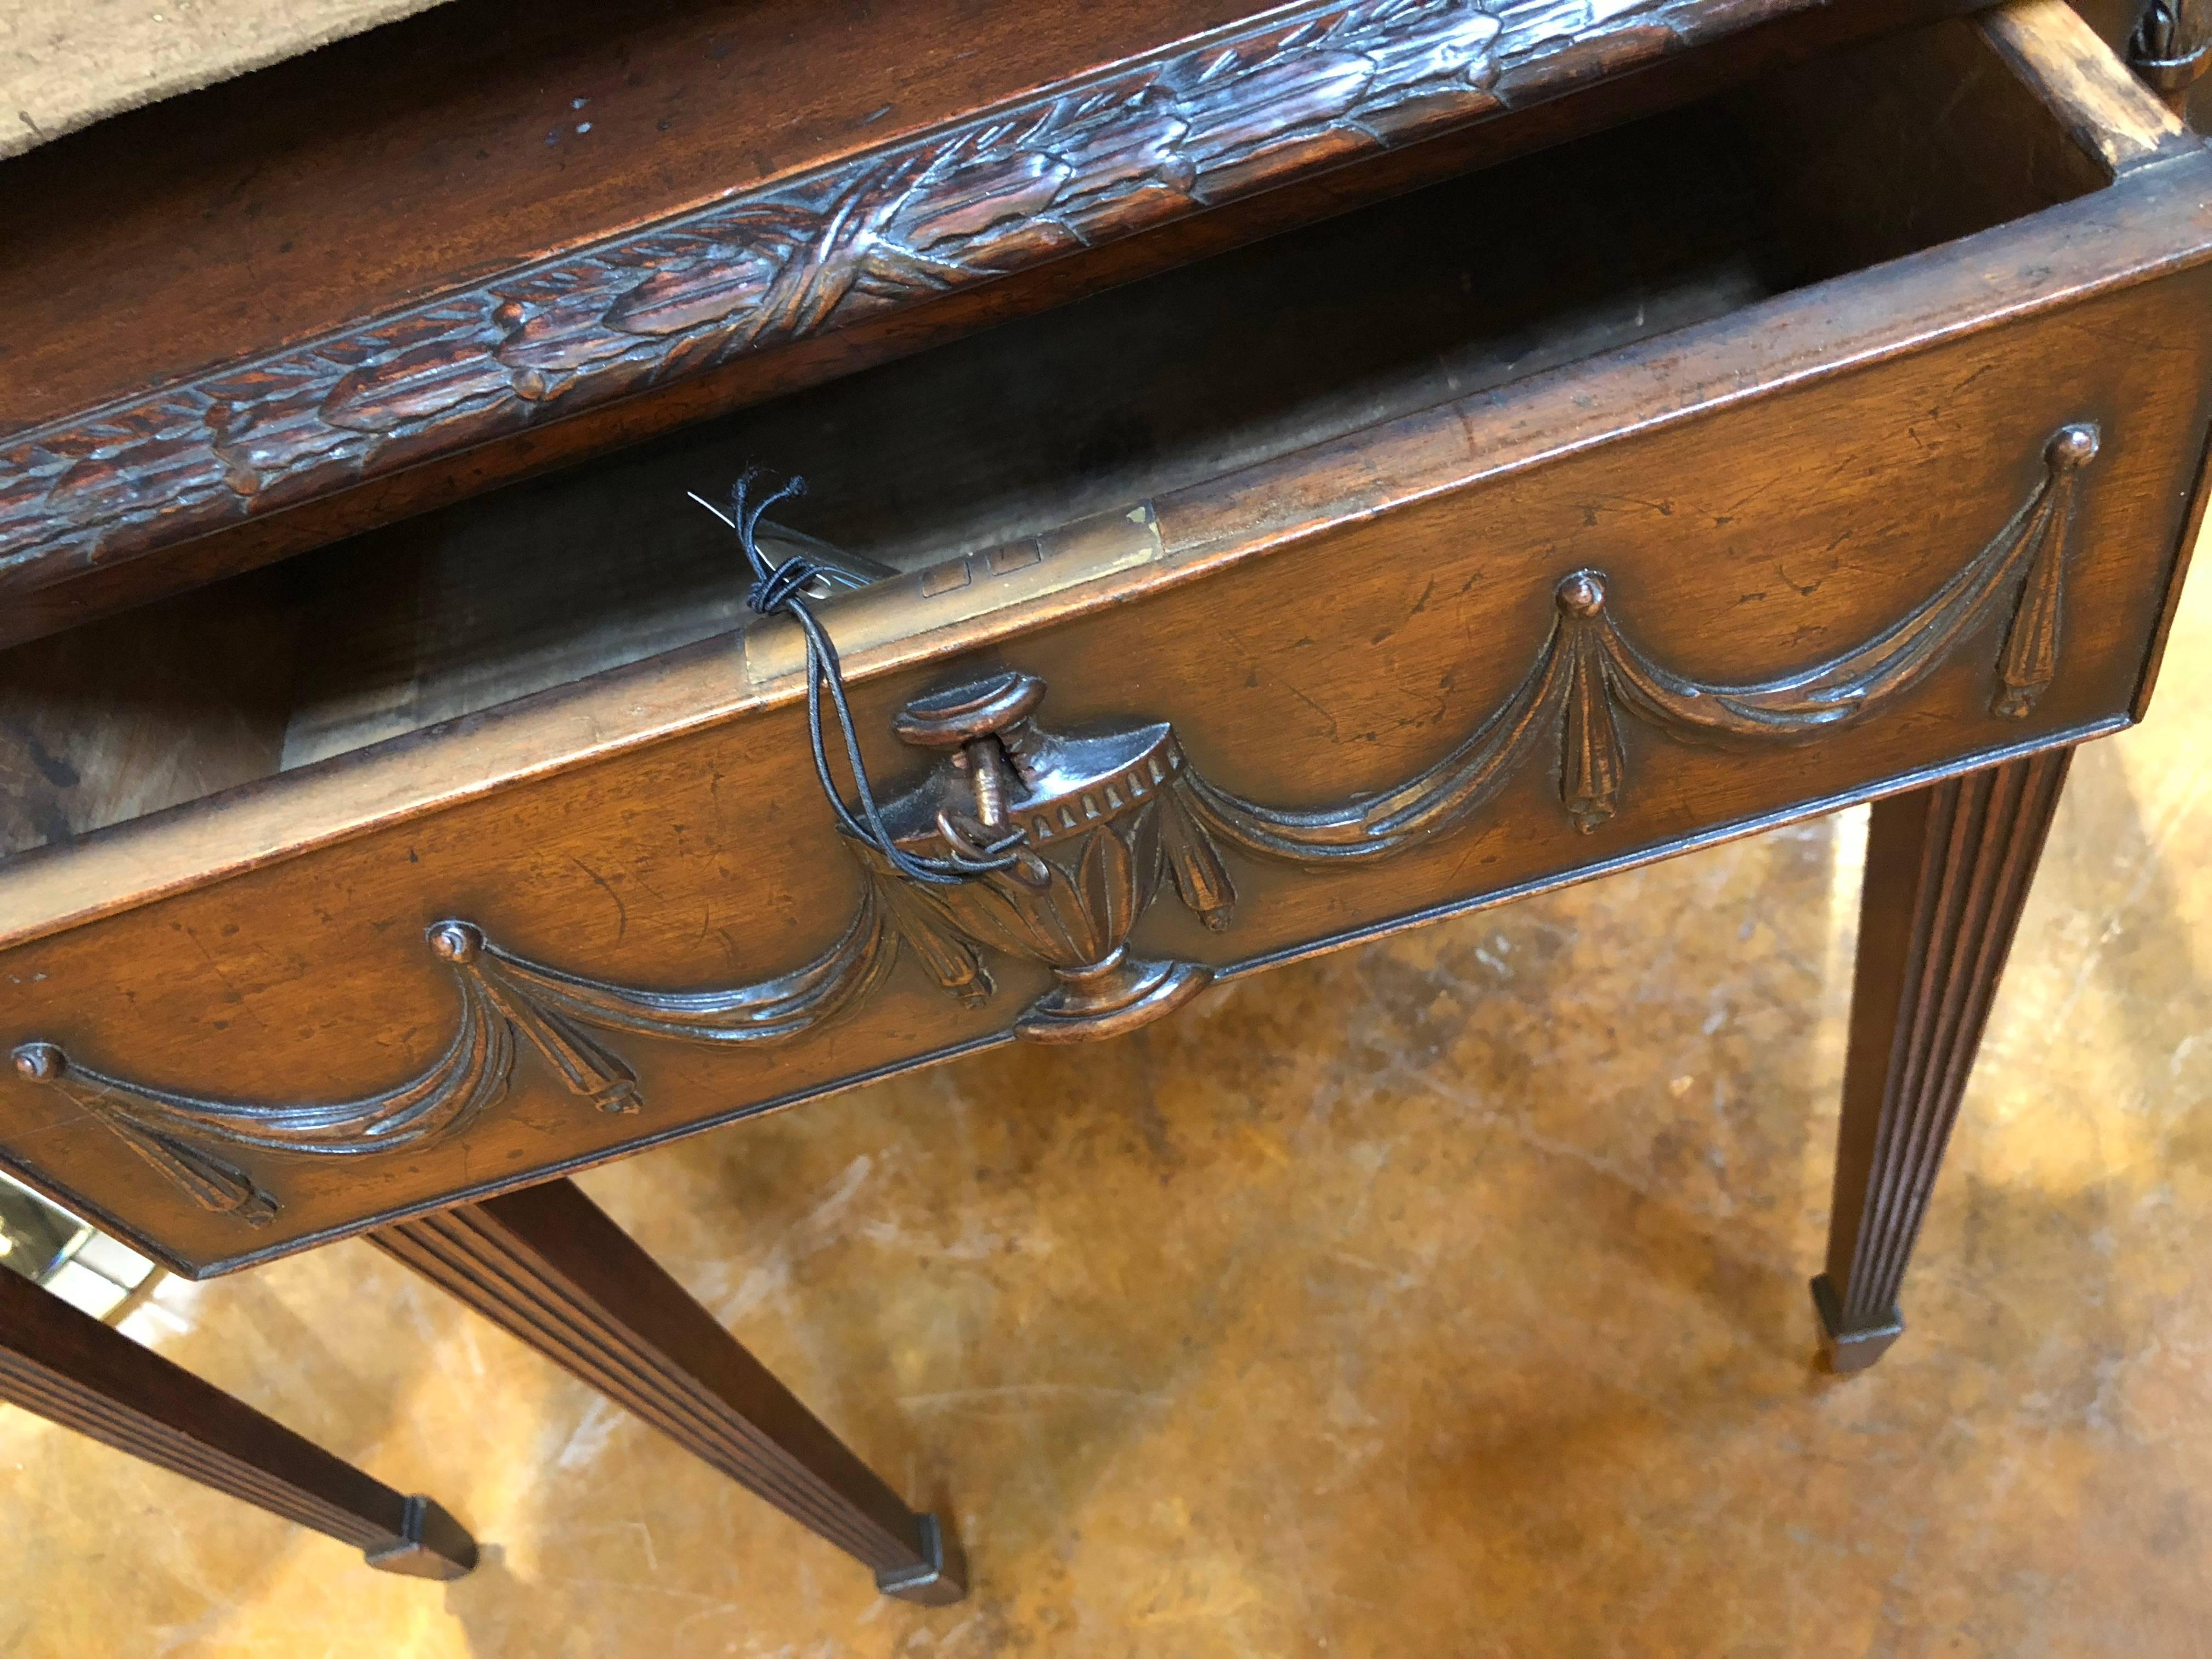 19th Century English Regency Mahogany Console Table with Receding Sides from the 1850s